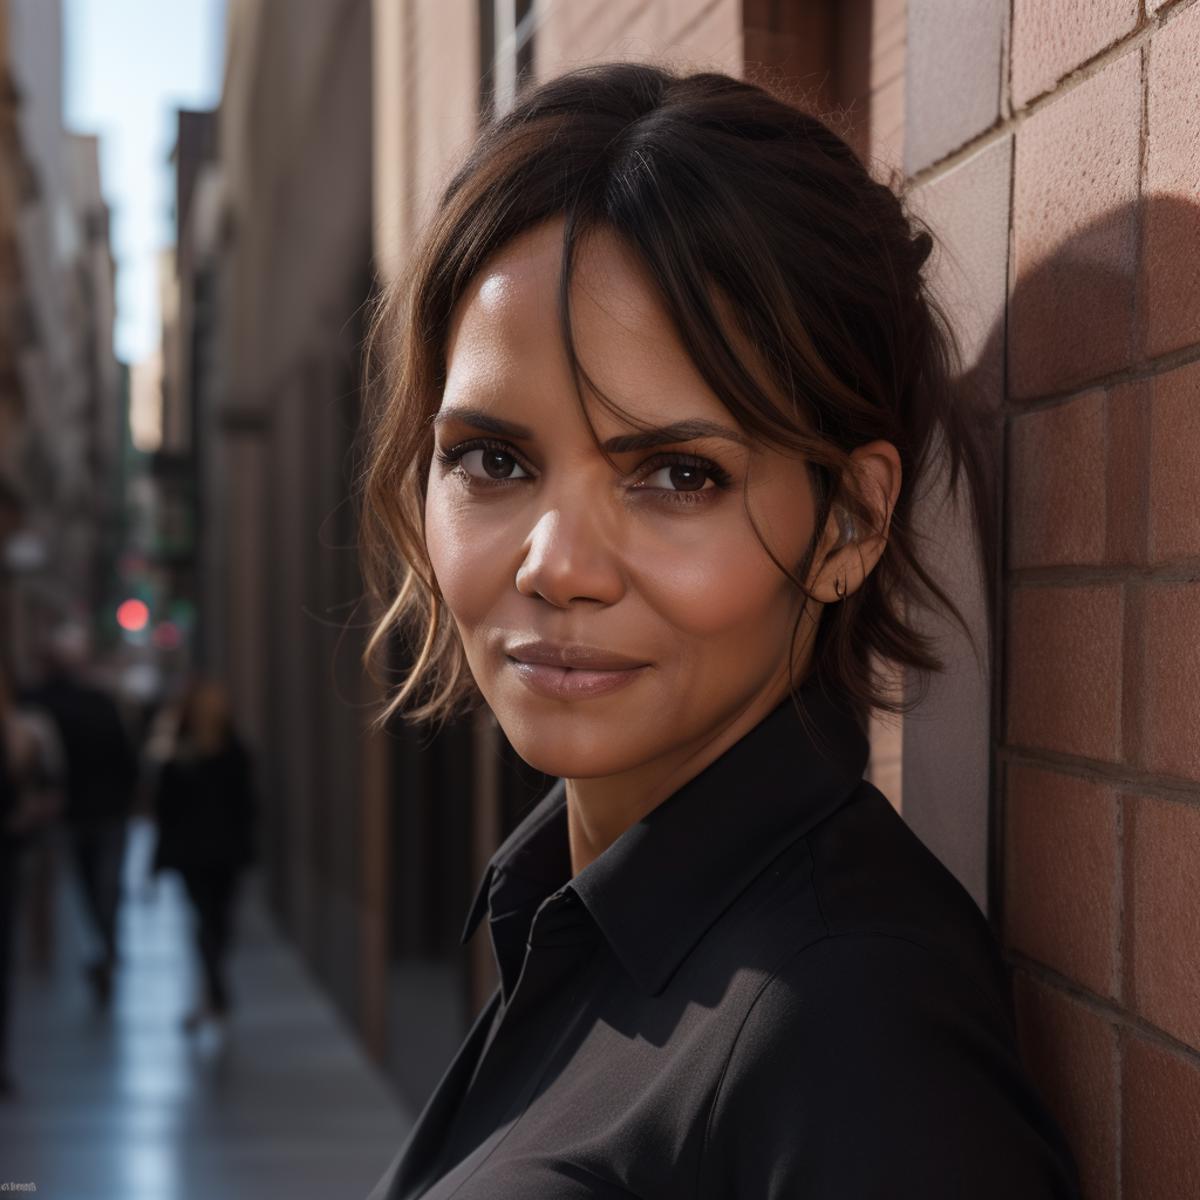 Halle Berry image by infamous__fish